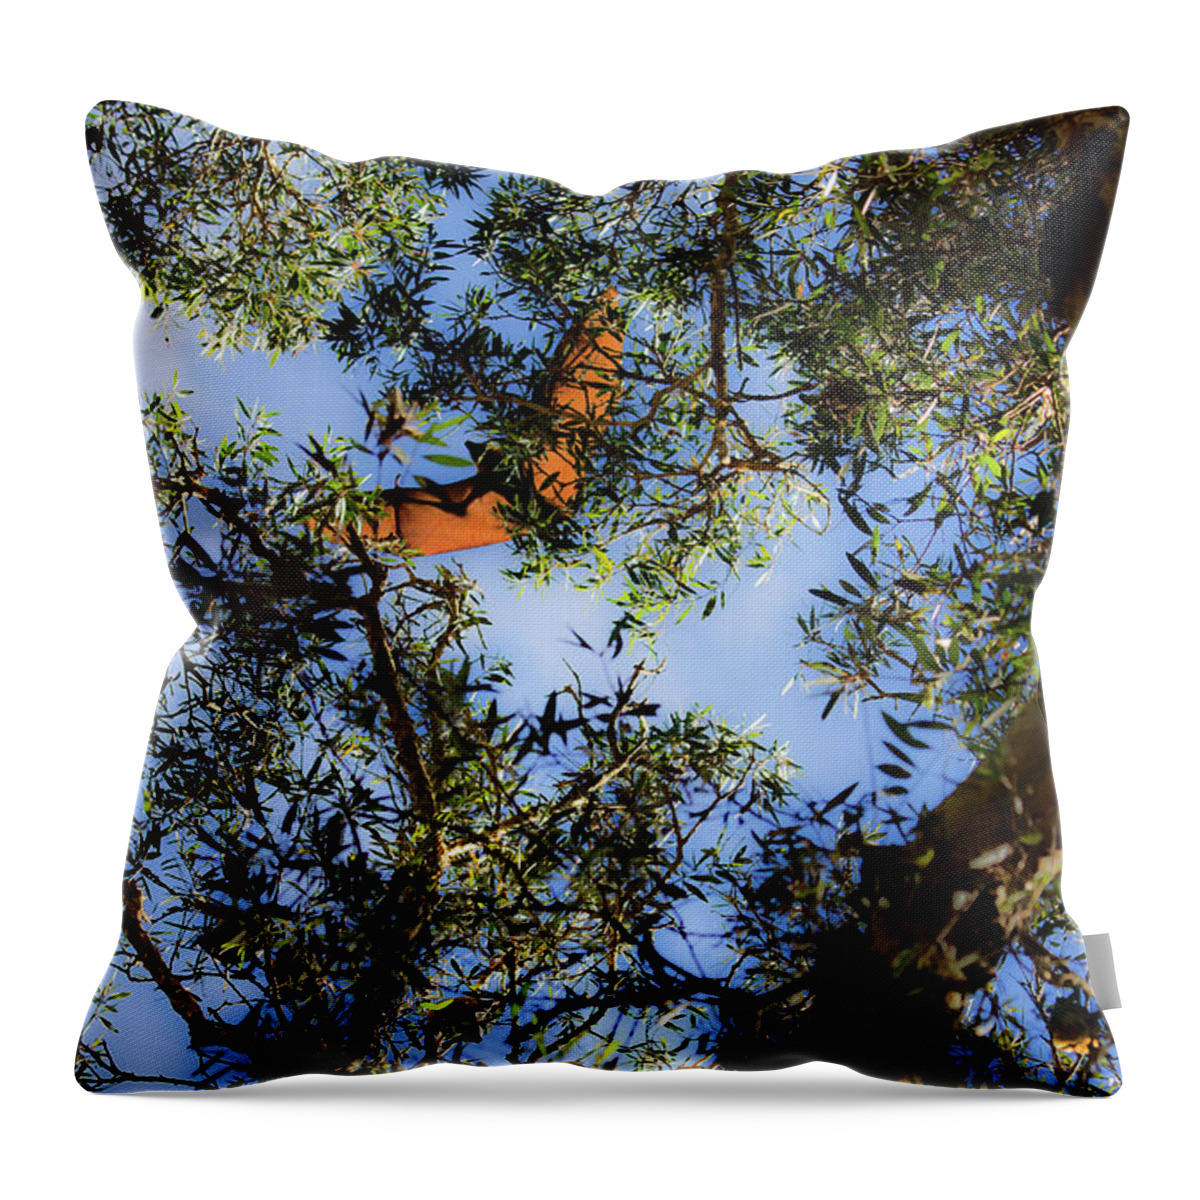 Grey Headed Throw Pillow featuring the photograph Flying Fox Is Flying by Miroslava Jurcik